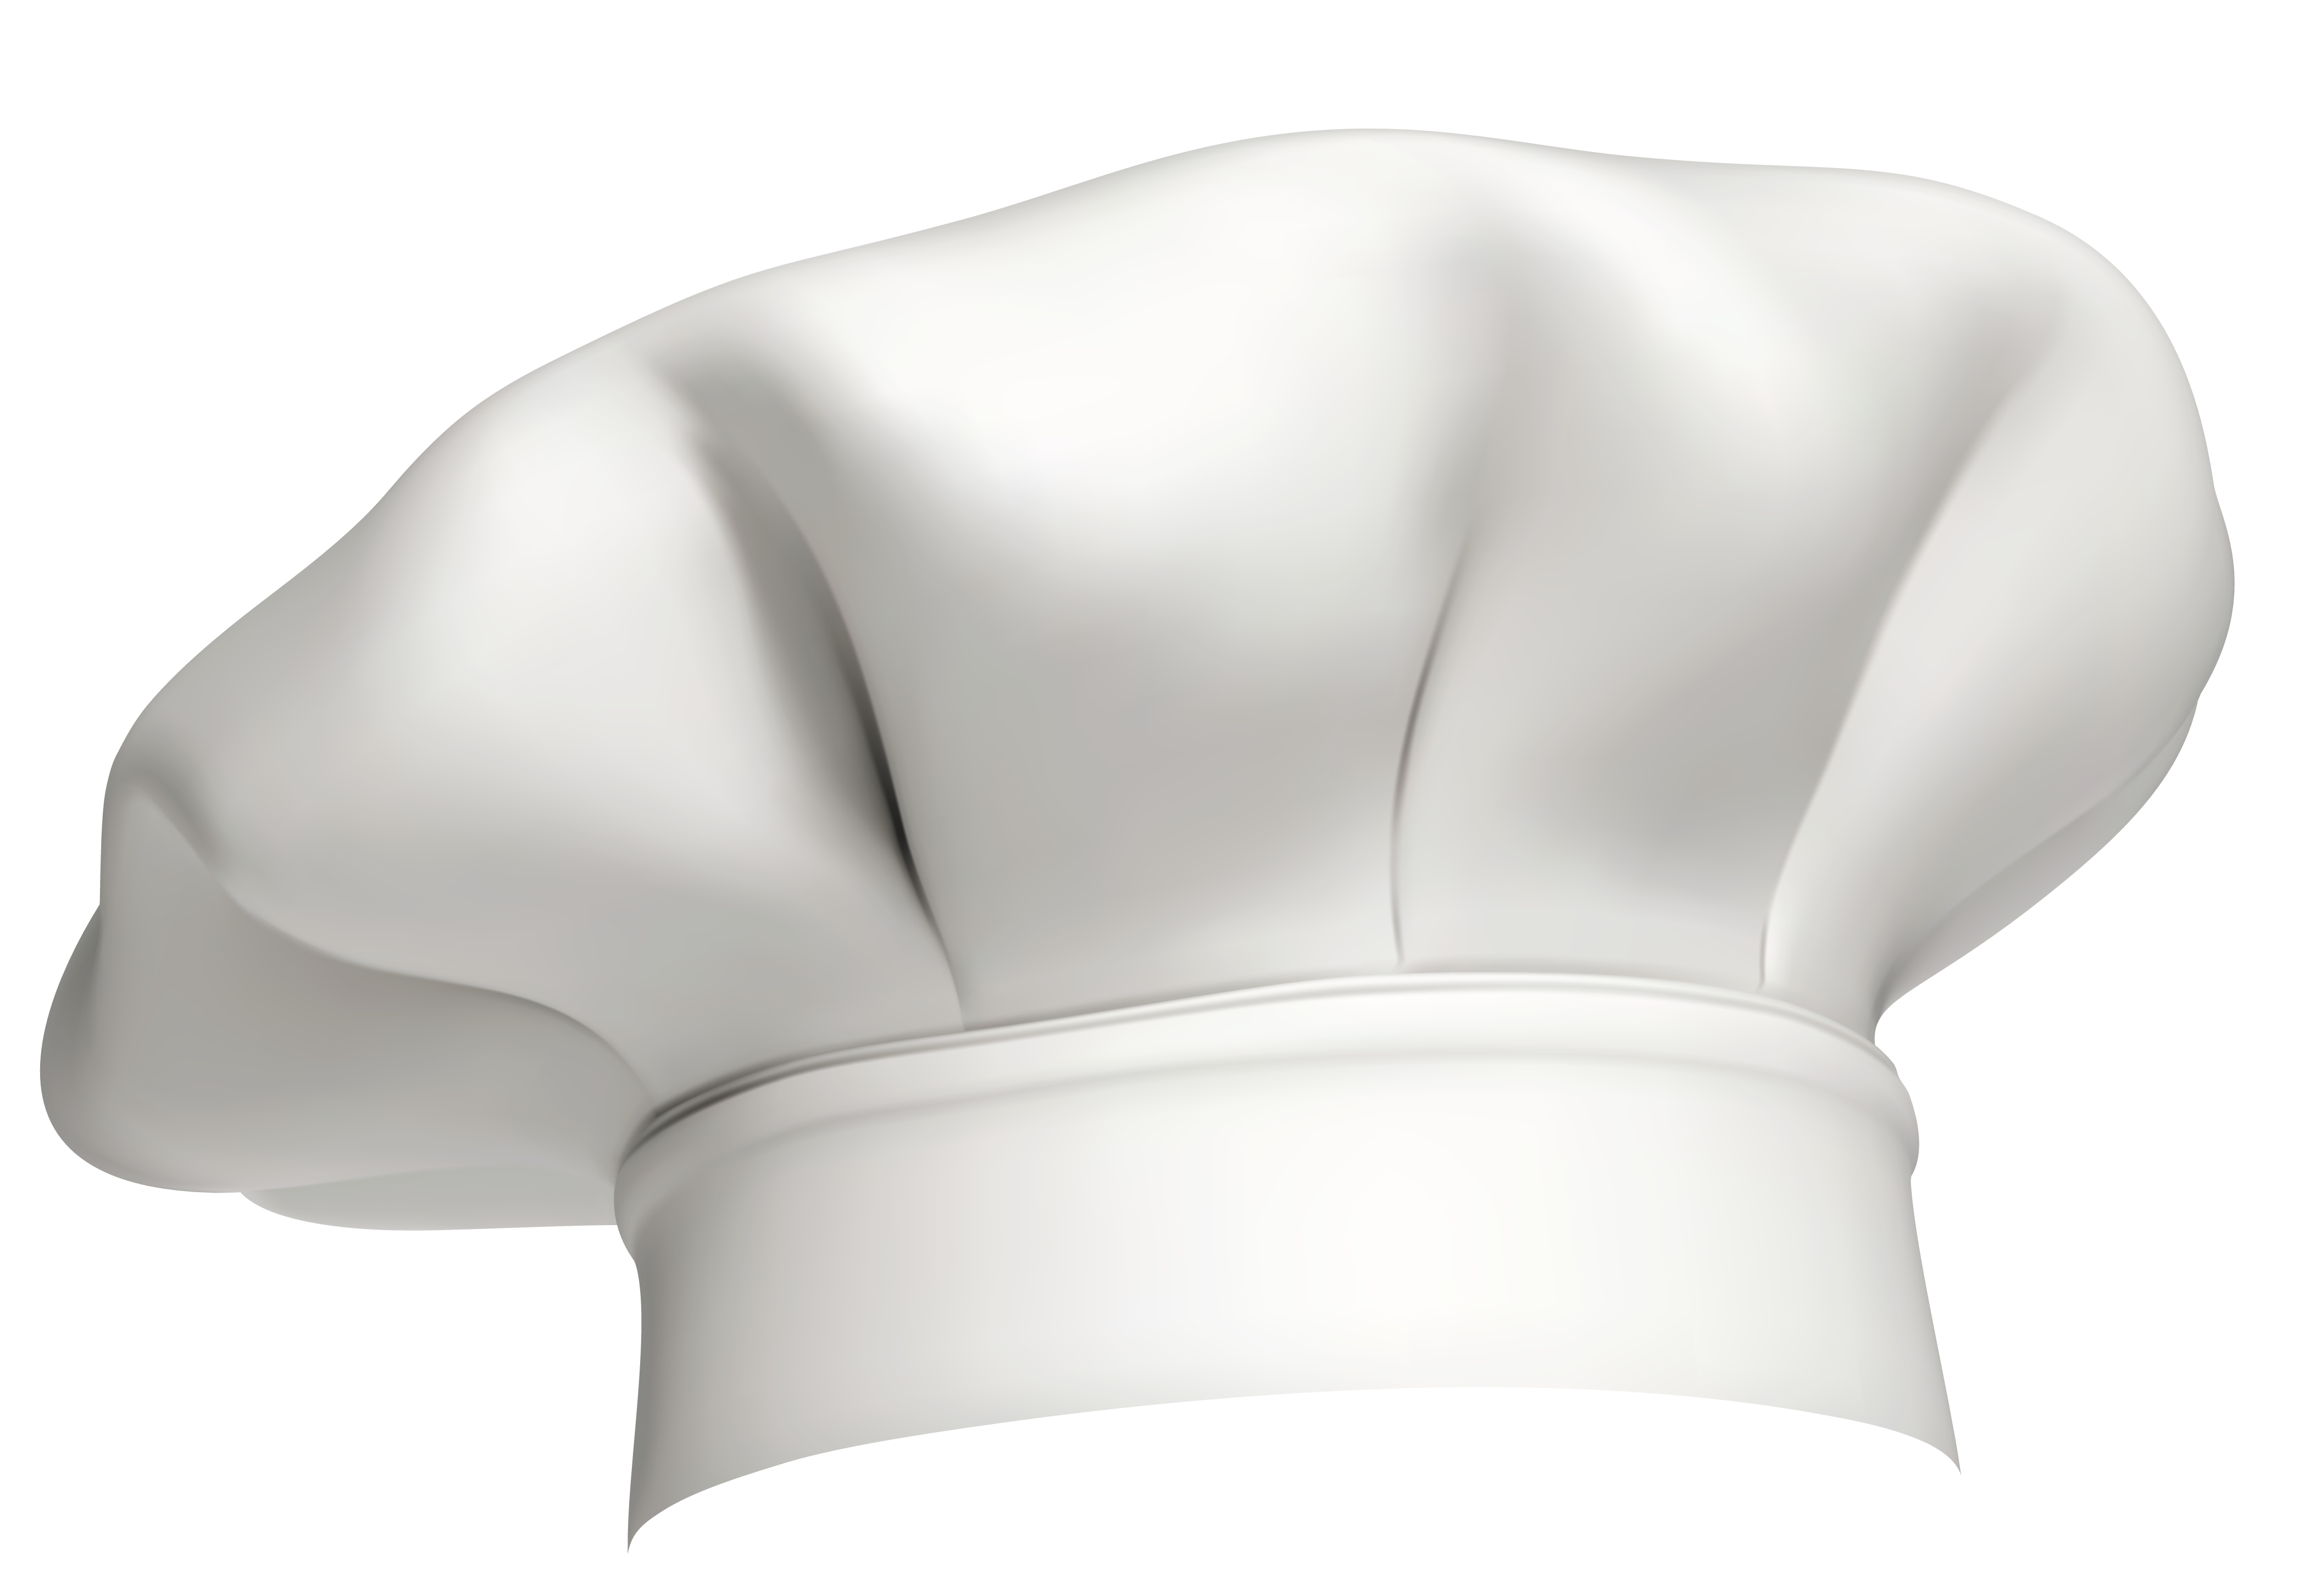 Download Chef Cap PNG Image for Free